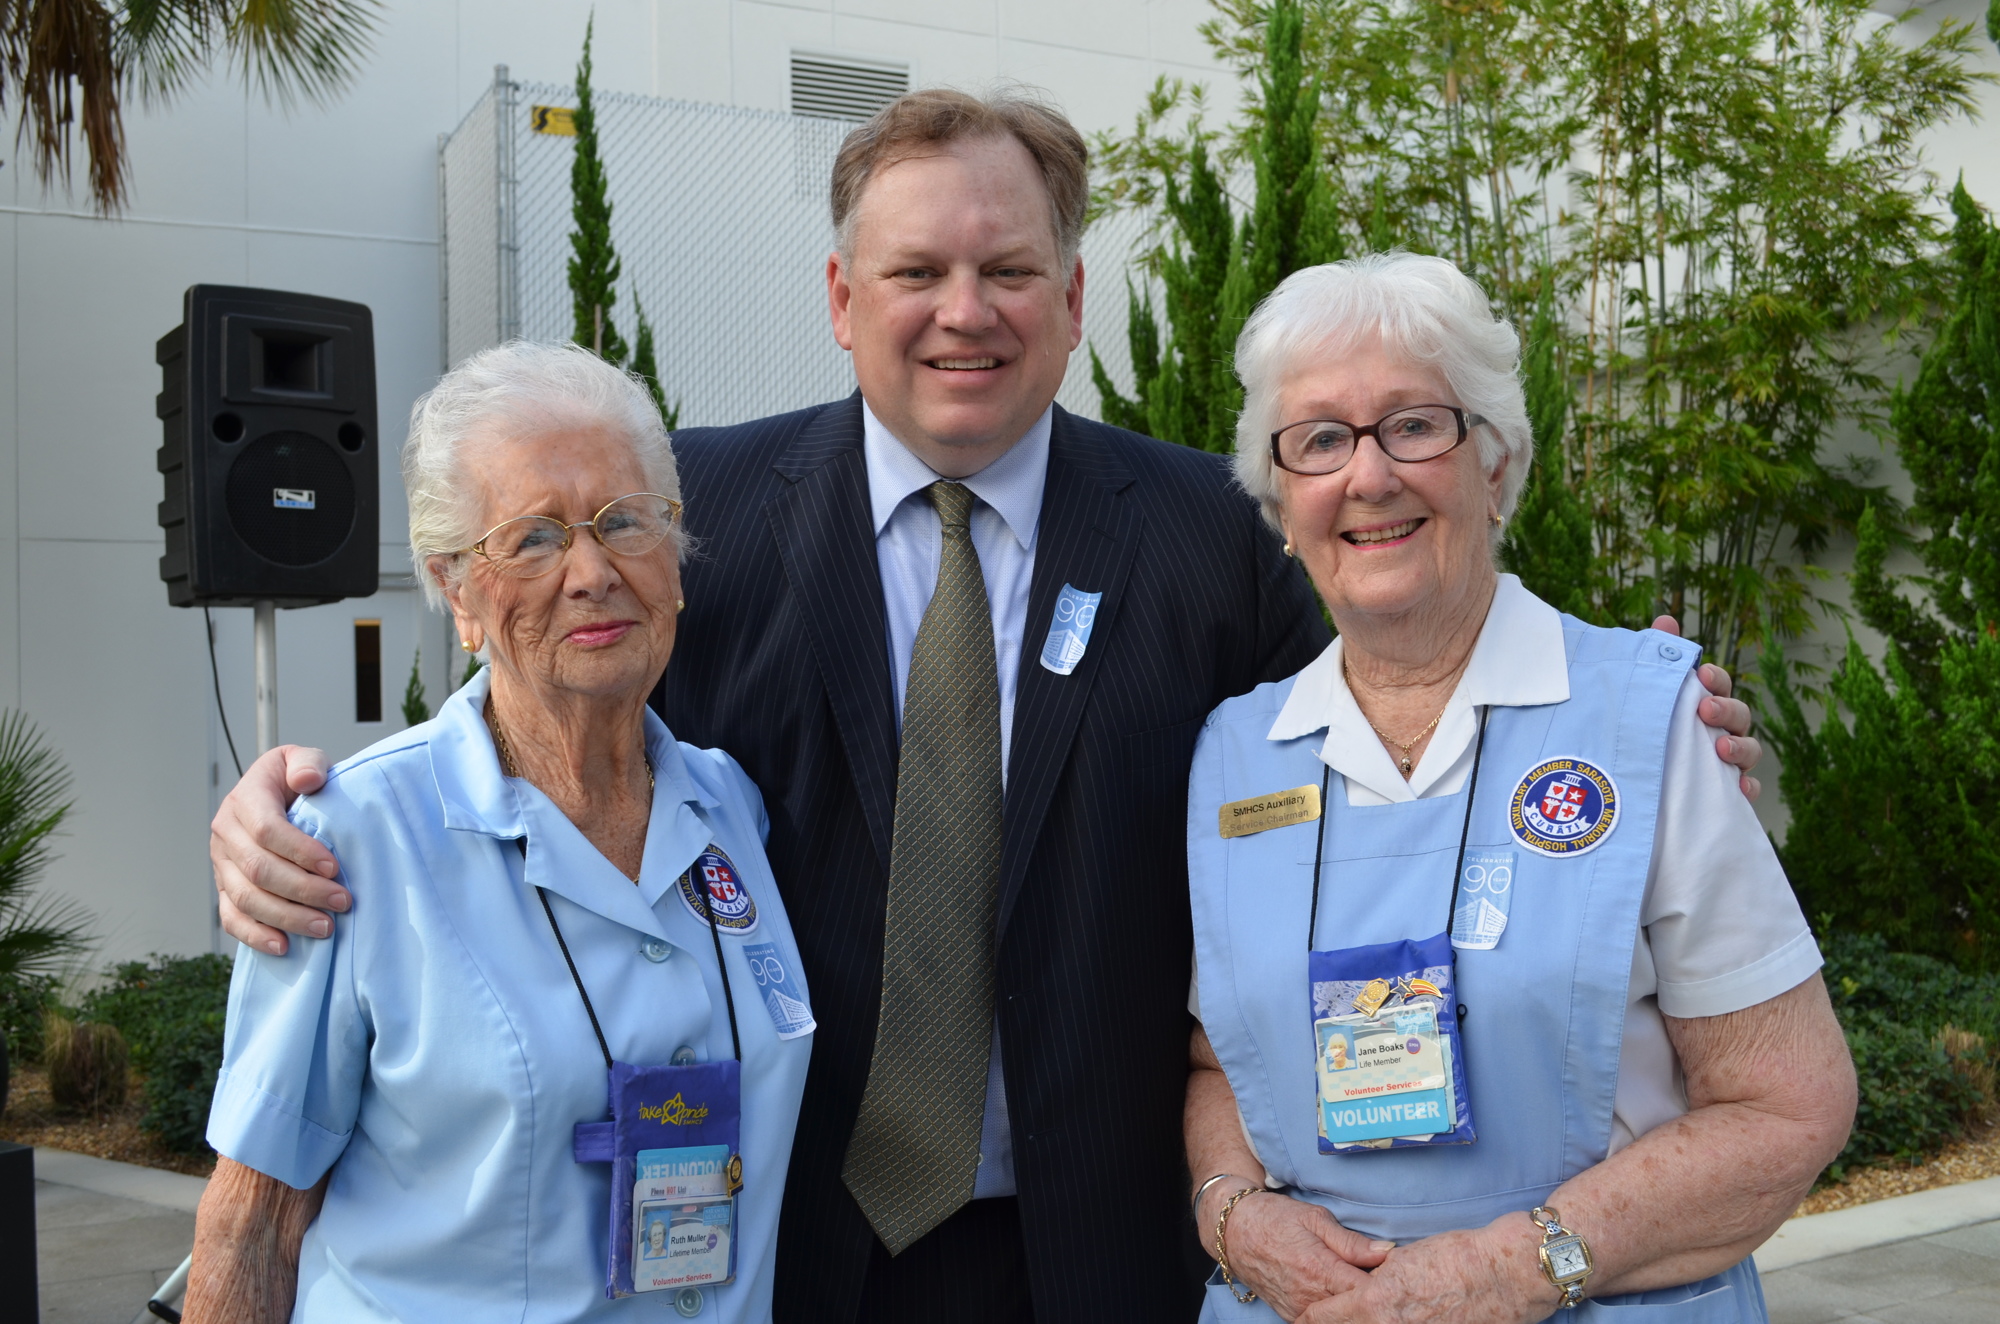 Long-time volunteers Ruth Muller and Jane Boaks with Sarasota Memorial Health Care System President and CEO David Verinder.